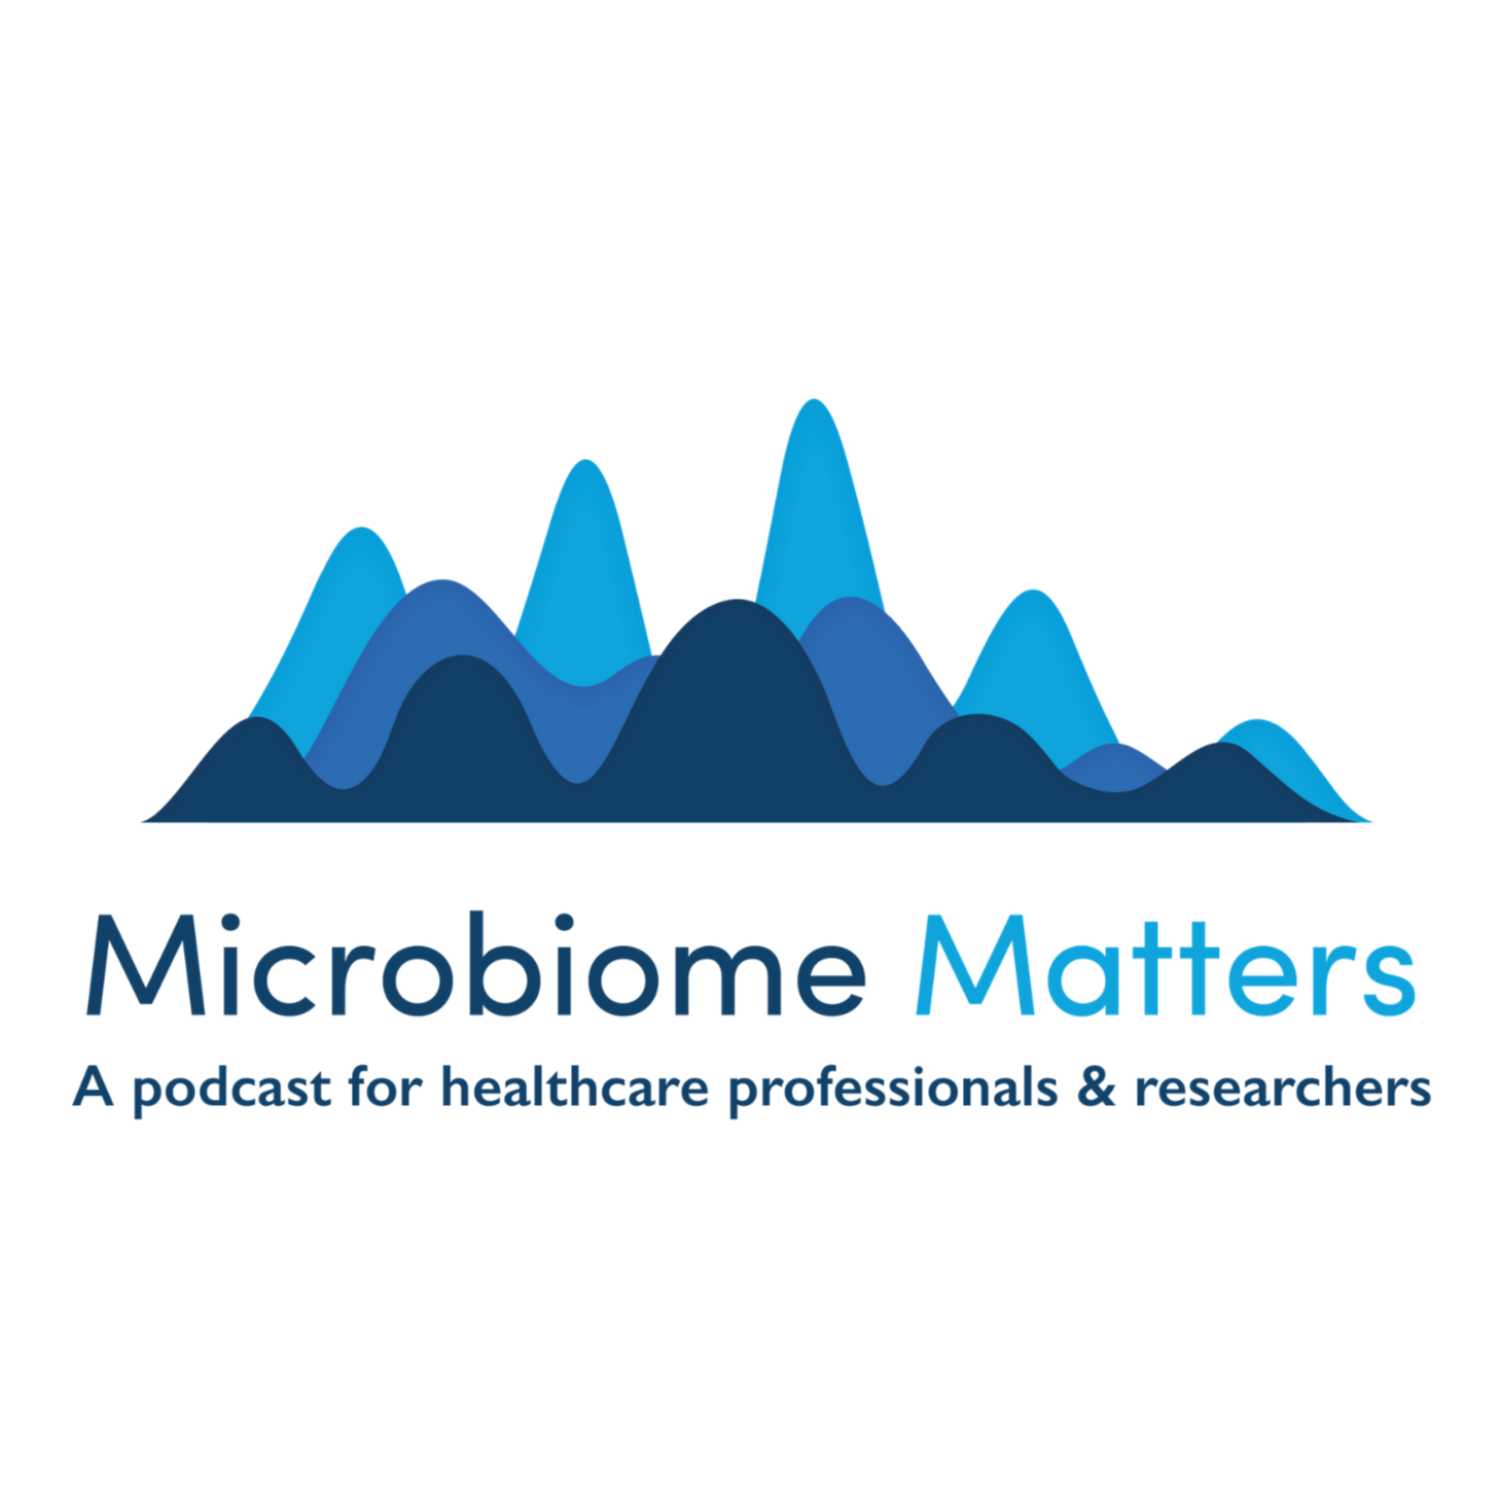 S4E1: Functional Gut Disorders & IBS [with Kirsten Jackson]